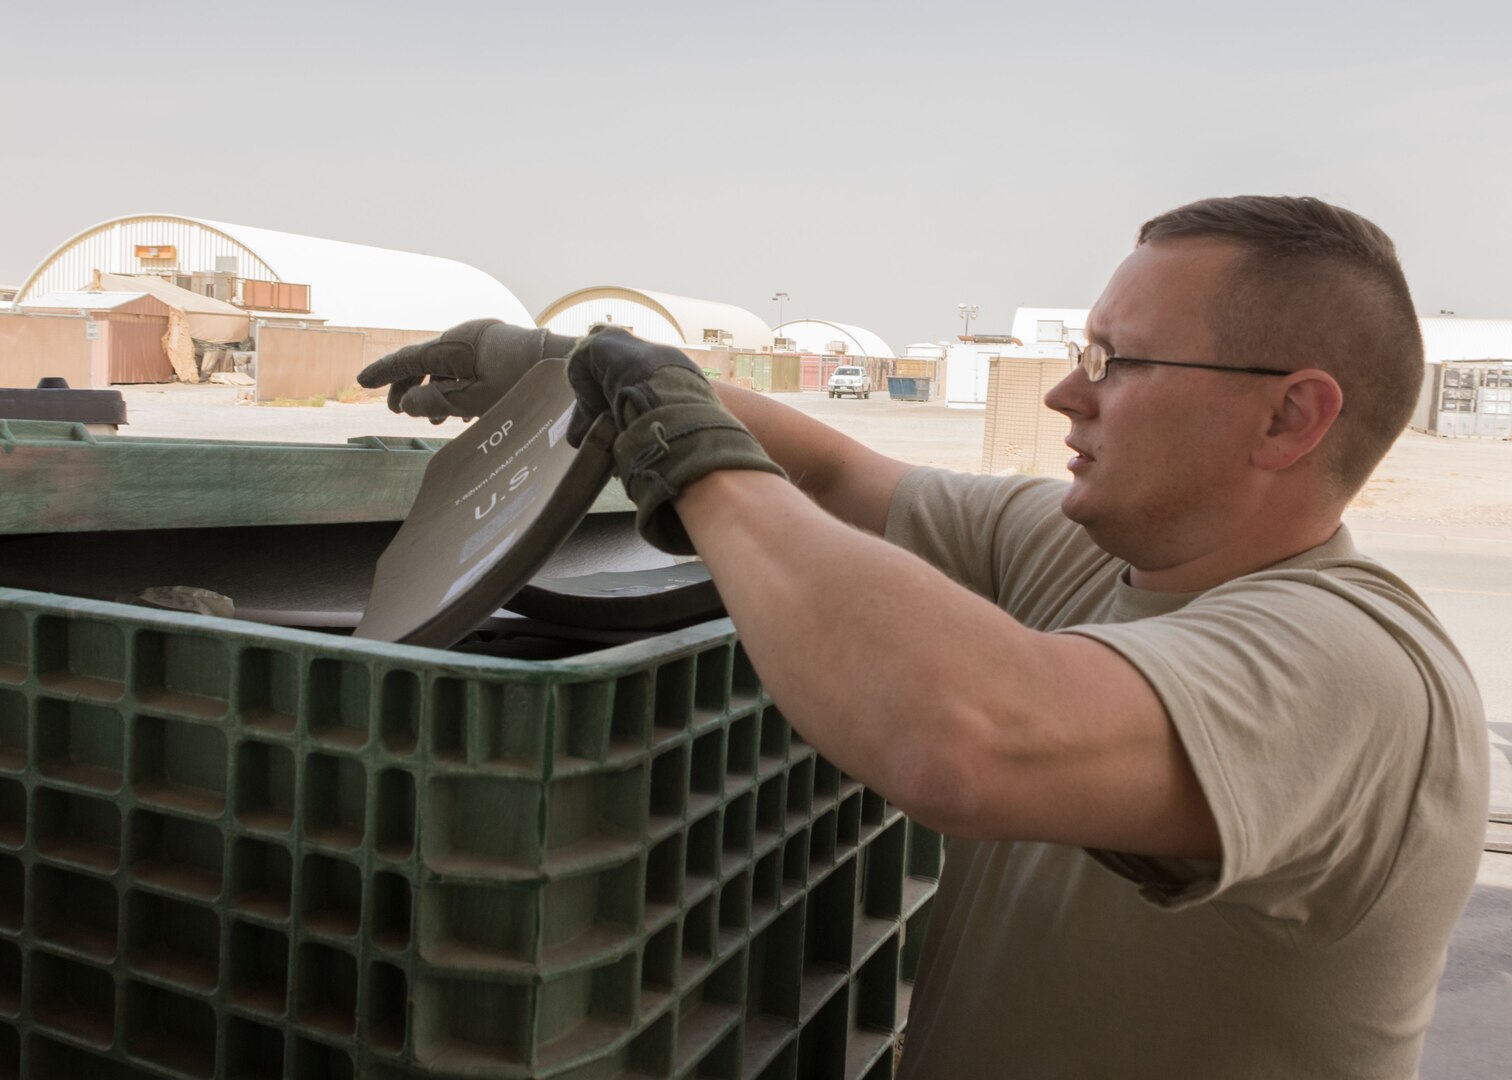 Master Sgt. Brian Donato, a 386th Expeditionary Logistics Readiness Squadron expeditionary theater distribution center section chief, explains the process for inspecting plates used in improved outer tactical vests at an undisclosed location in Southwest Asia April 19, 2017. When plates are returned to the ETDC they are sent off to be x-ray inspected for defects to ensure they are safe for reissue. (U.S. Air Force photo/Staff Sgt. Andrew Park)